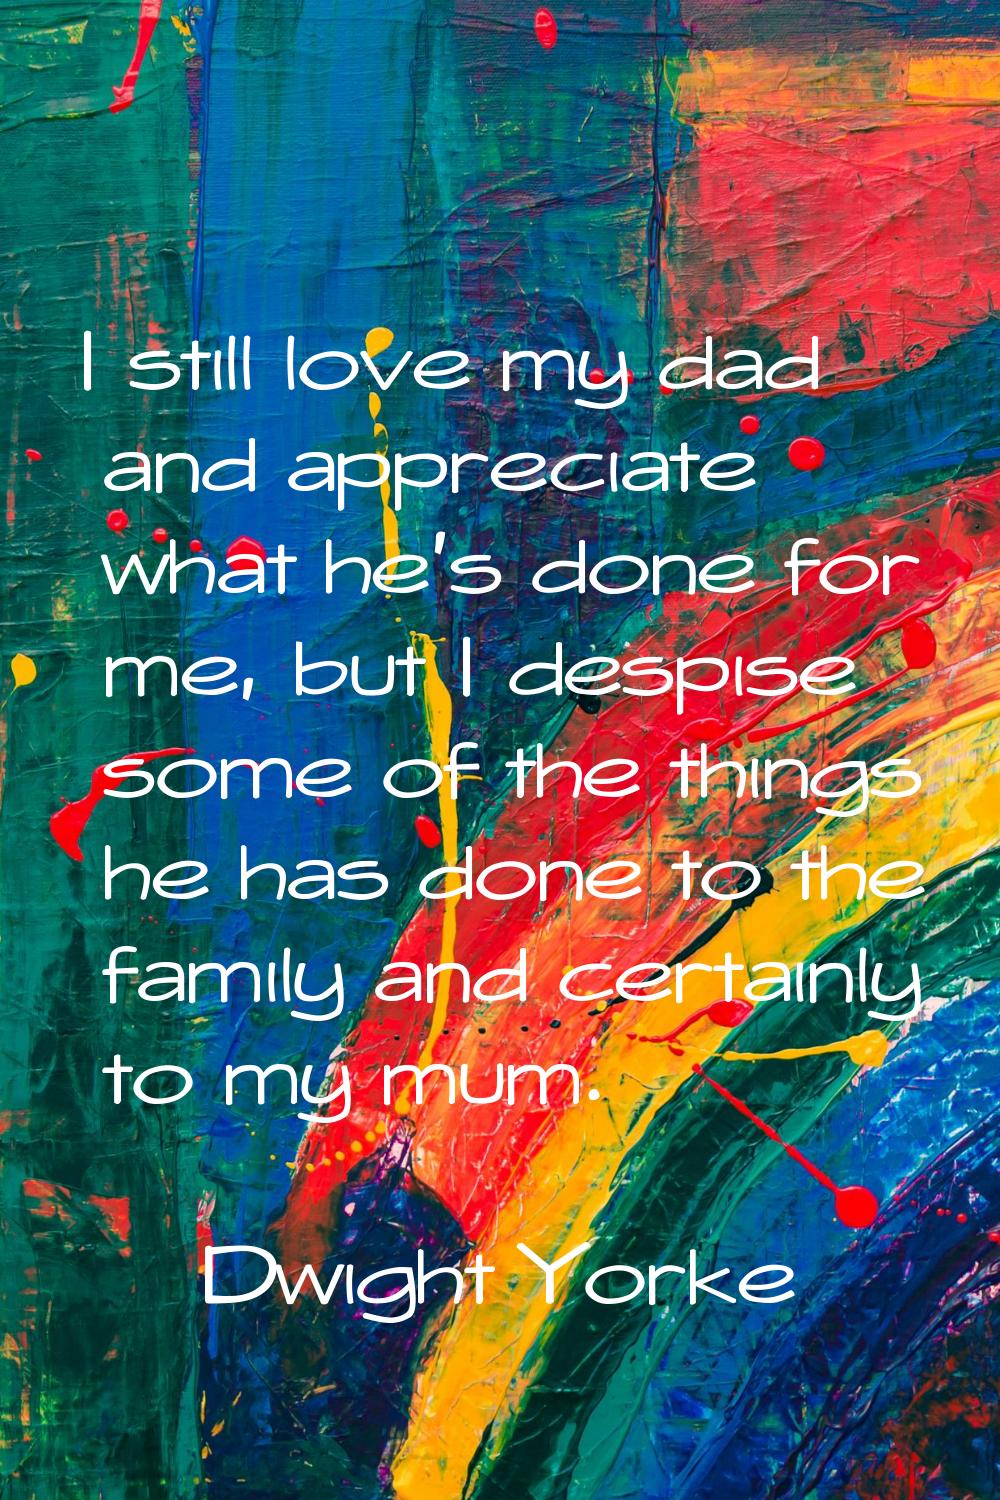 I still love my dad and appreciate what he's done for me, but I despise some of the things he has d